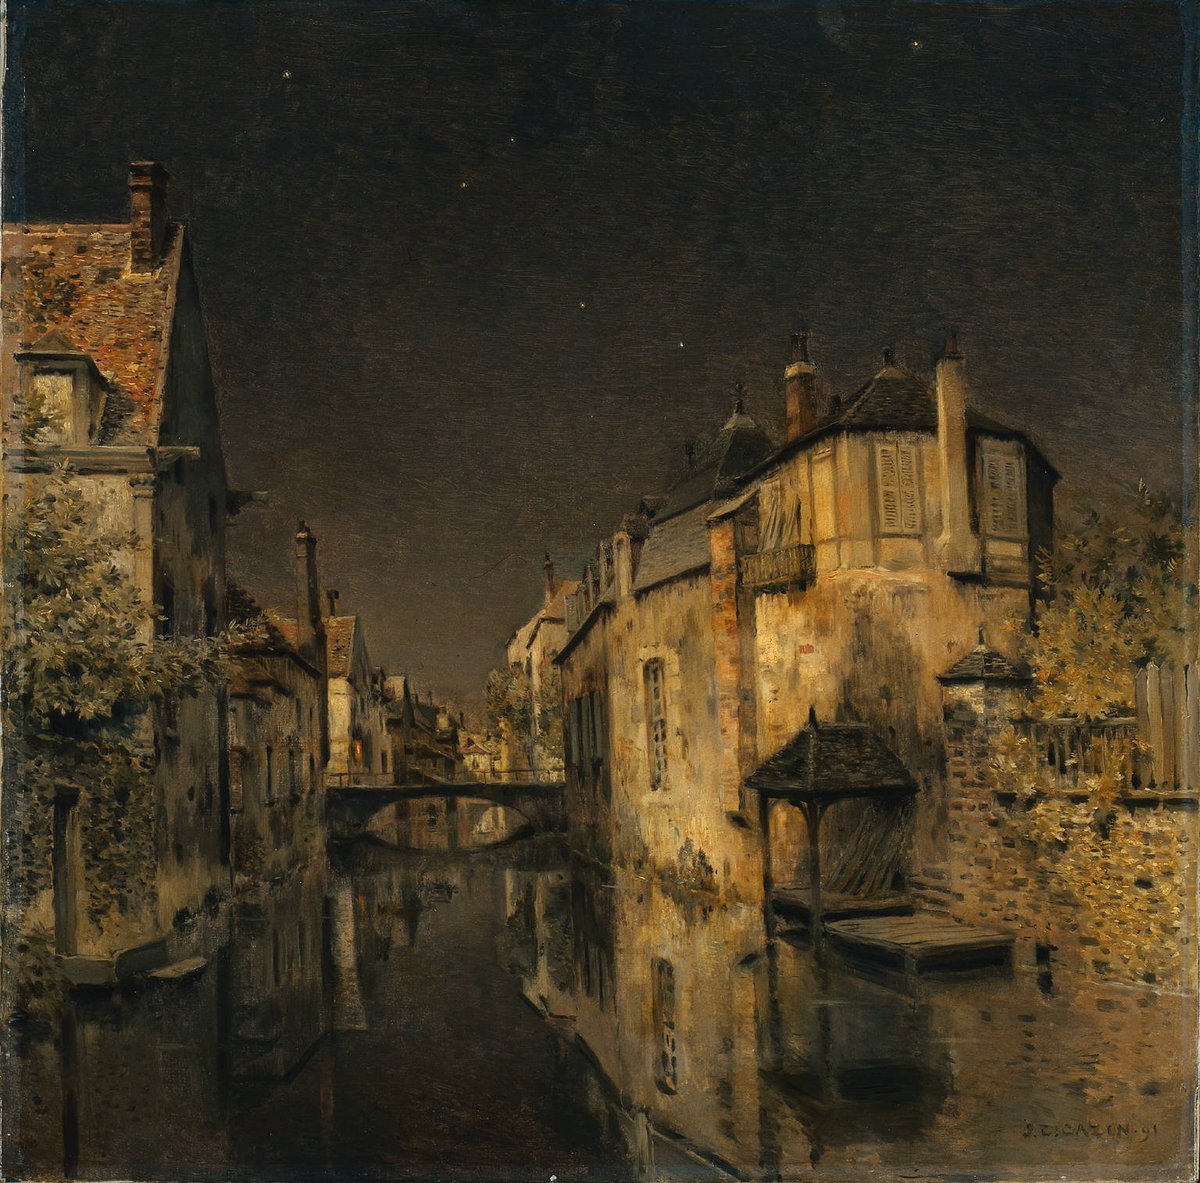 'Midnight' (1891) by Jean-Charles Cazin